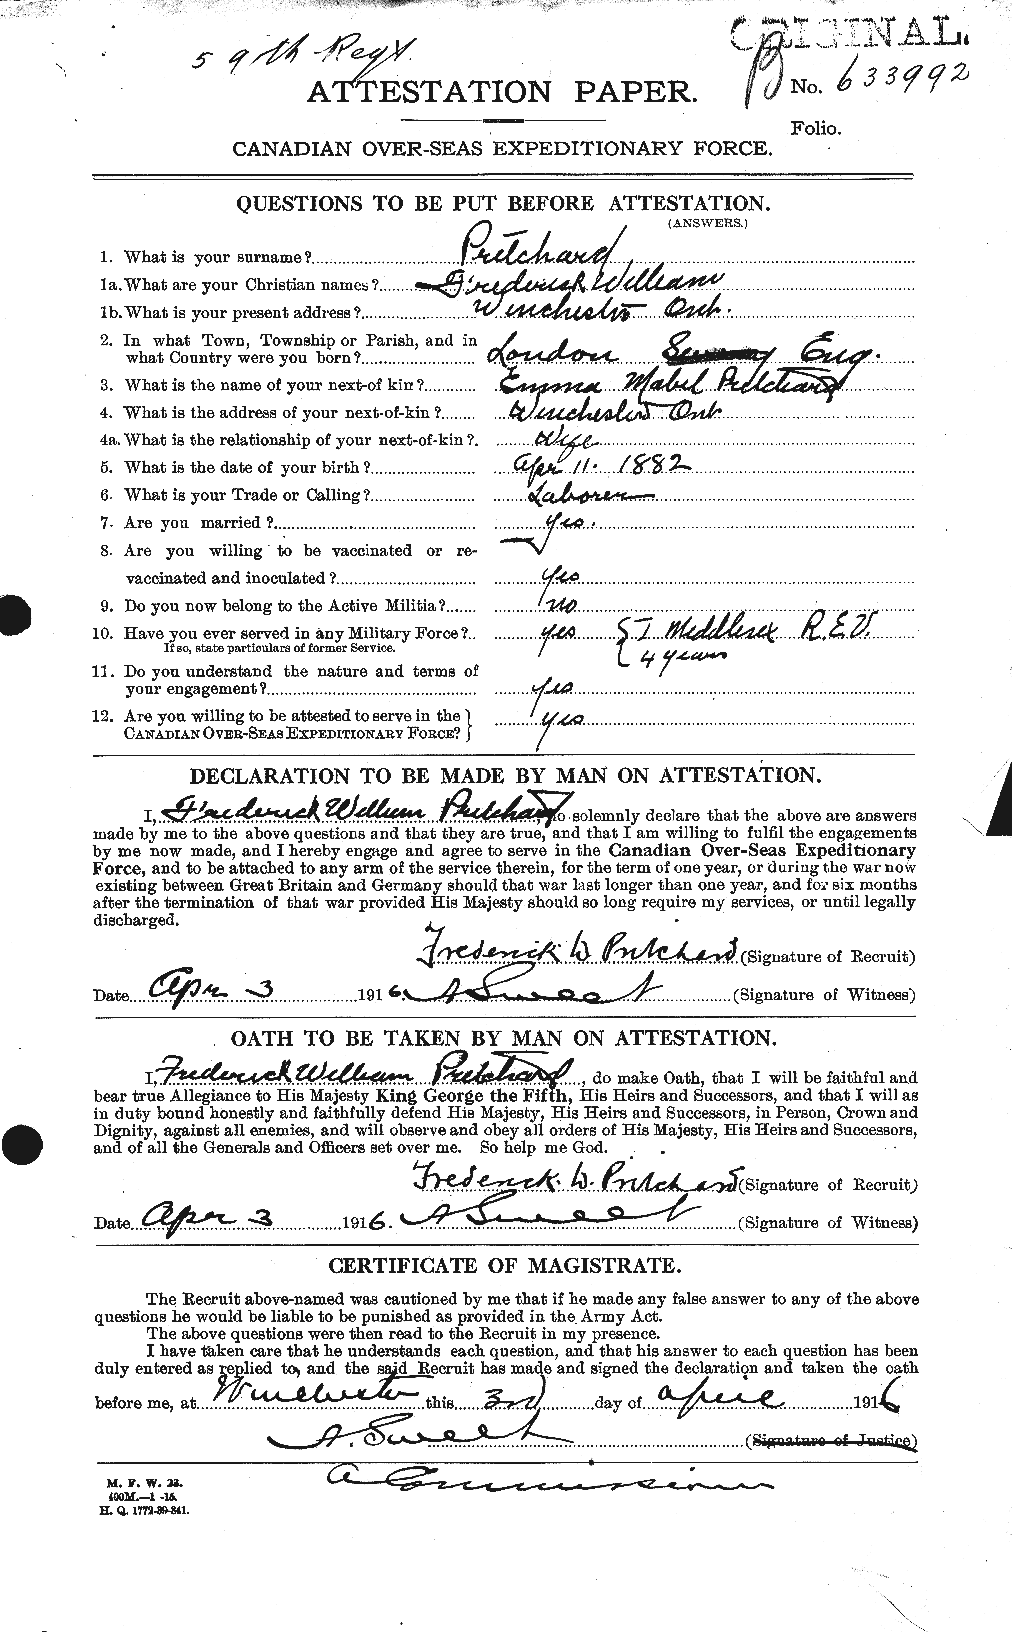 Personnel Records of the First World War - CEF 588526a